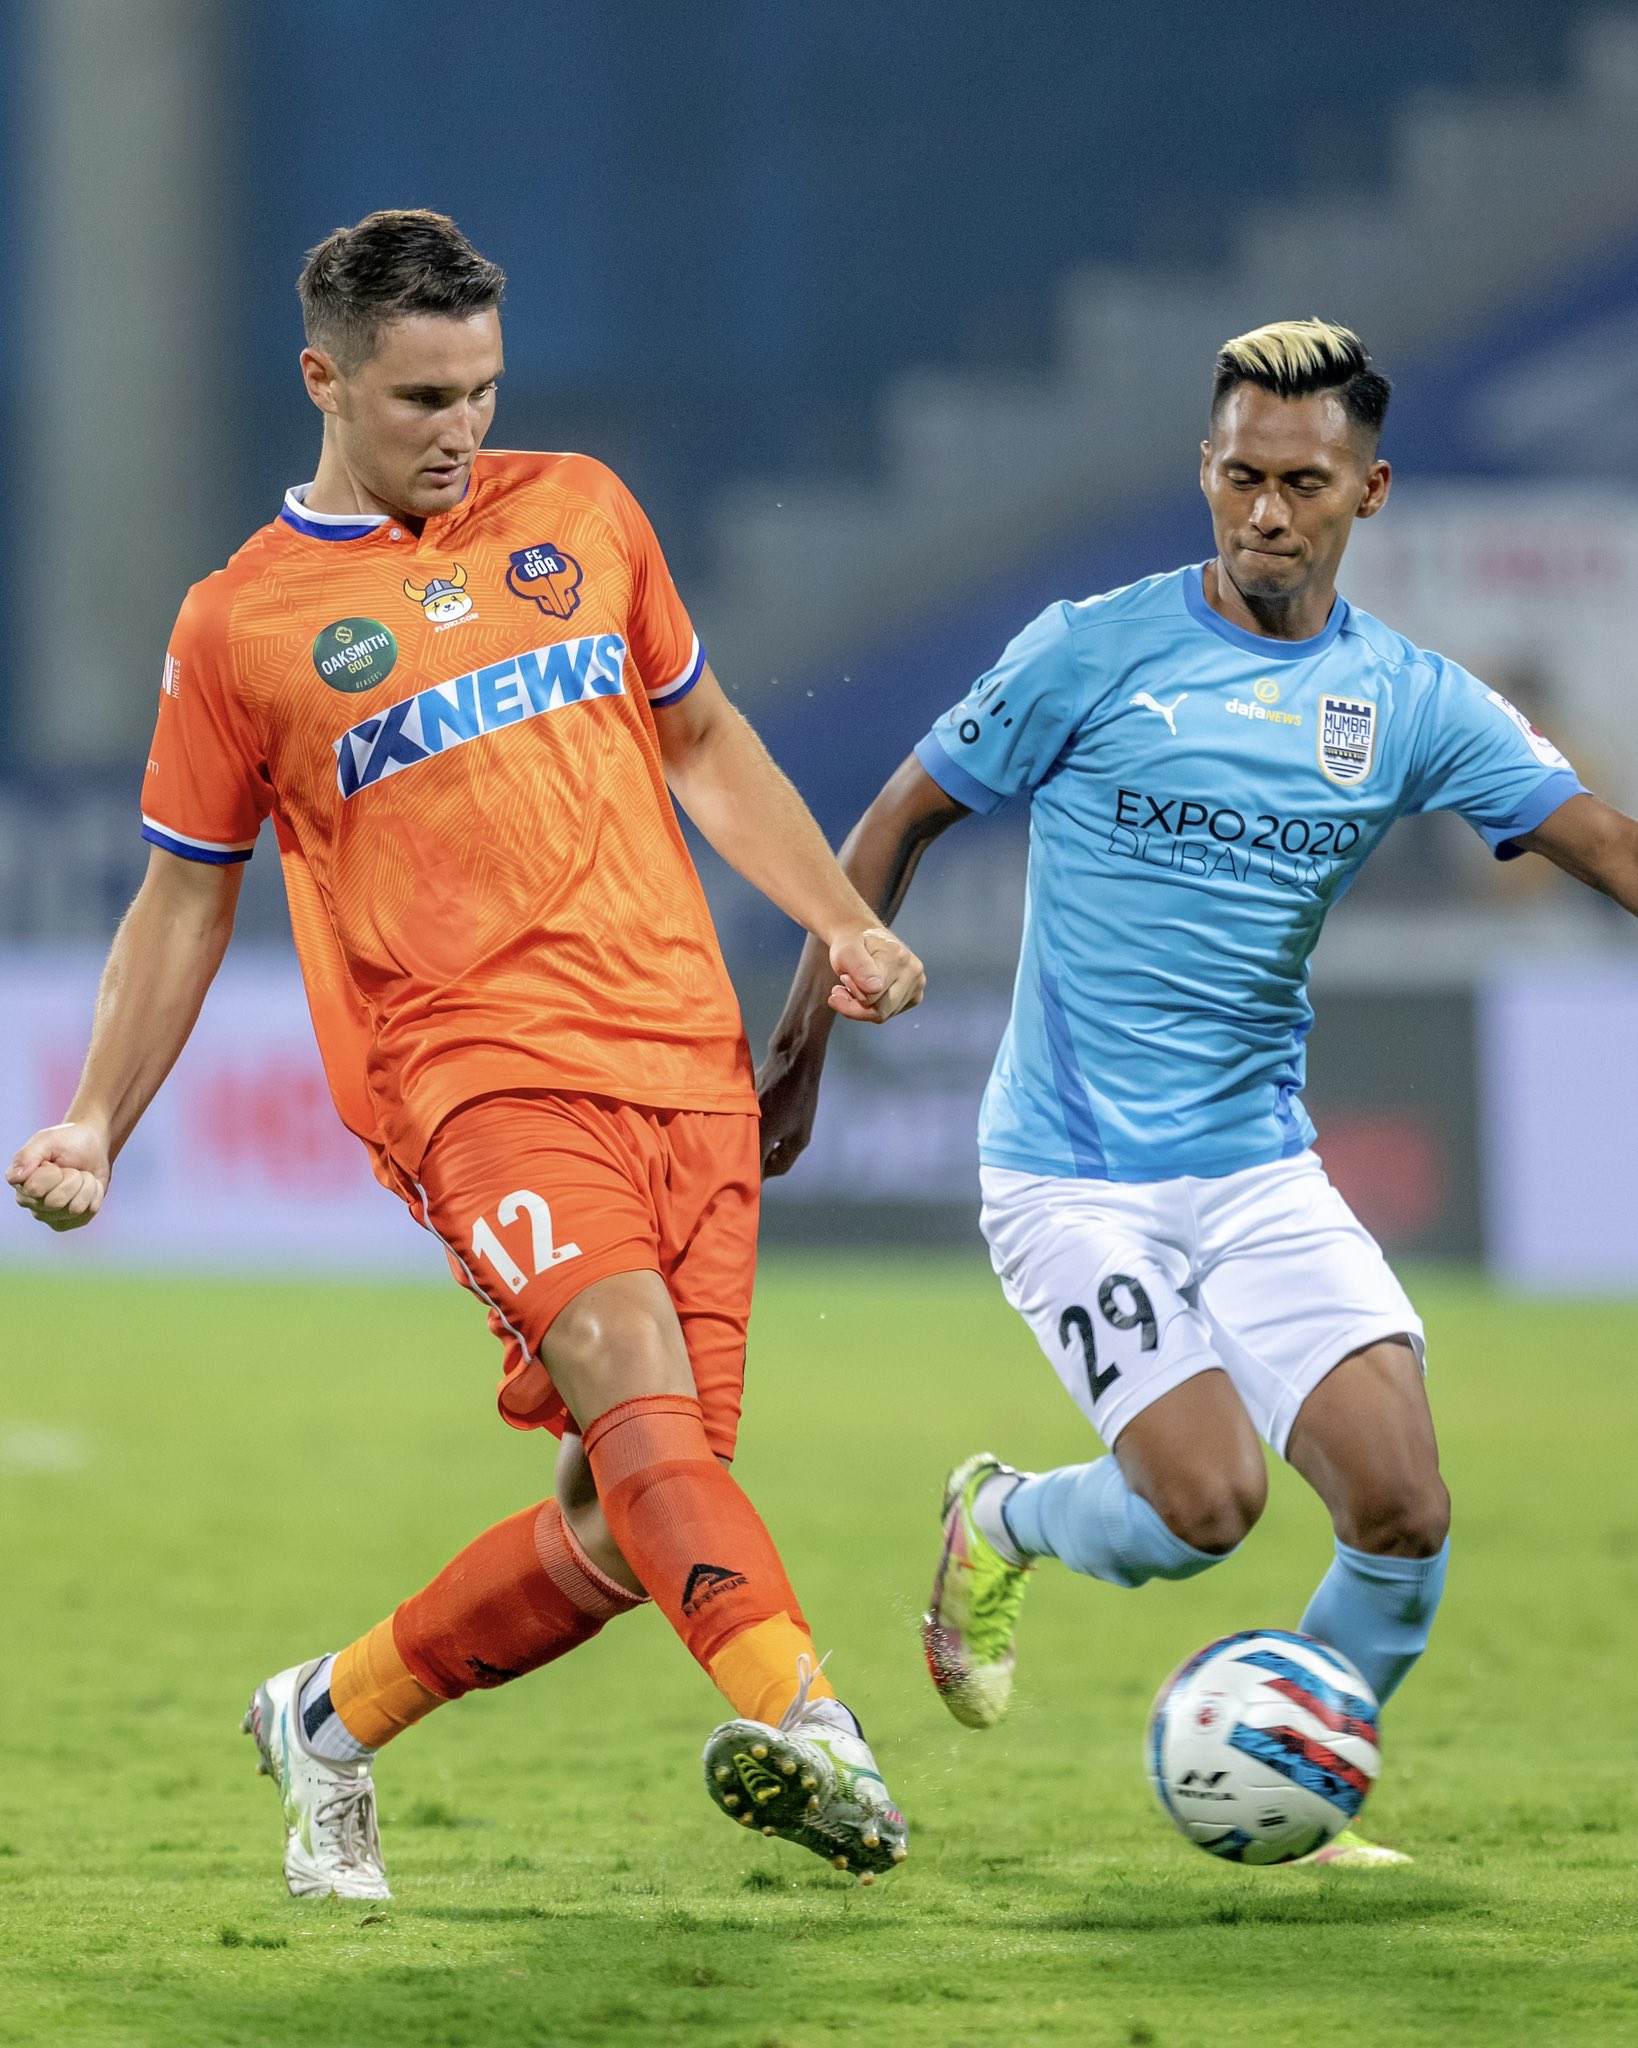 MCFC 2-0 FCG: Goals from Mehtab and Mauricio helps Mumbai City do the double over FC Goa, keeps them in contention for the playoffs